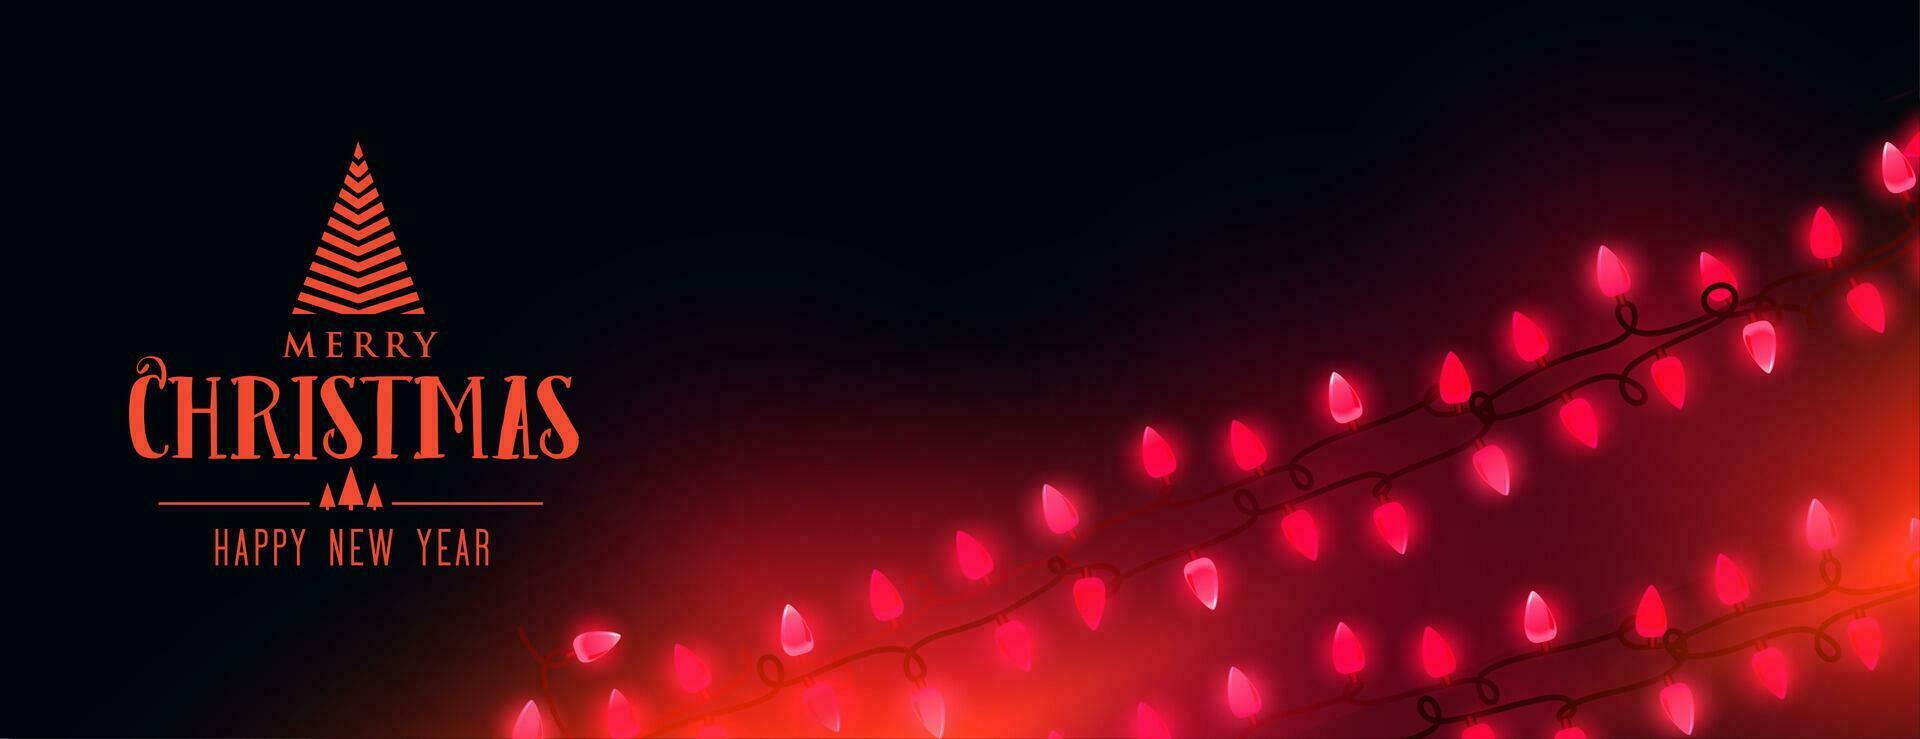 merry christmas red decorative lights banner vector